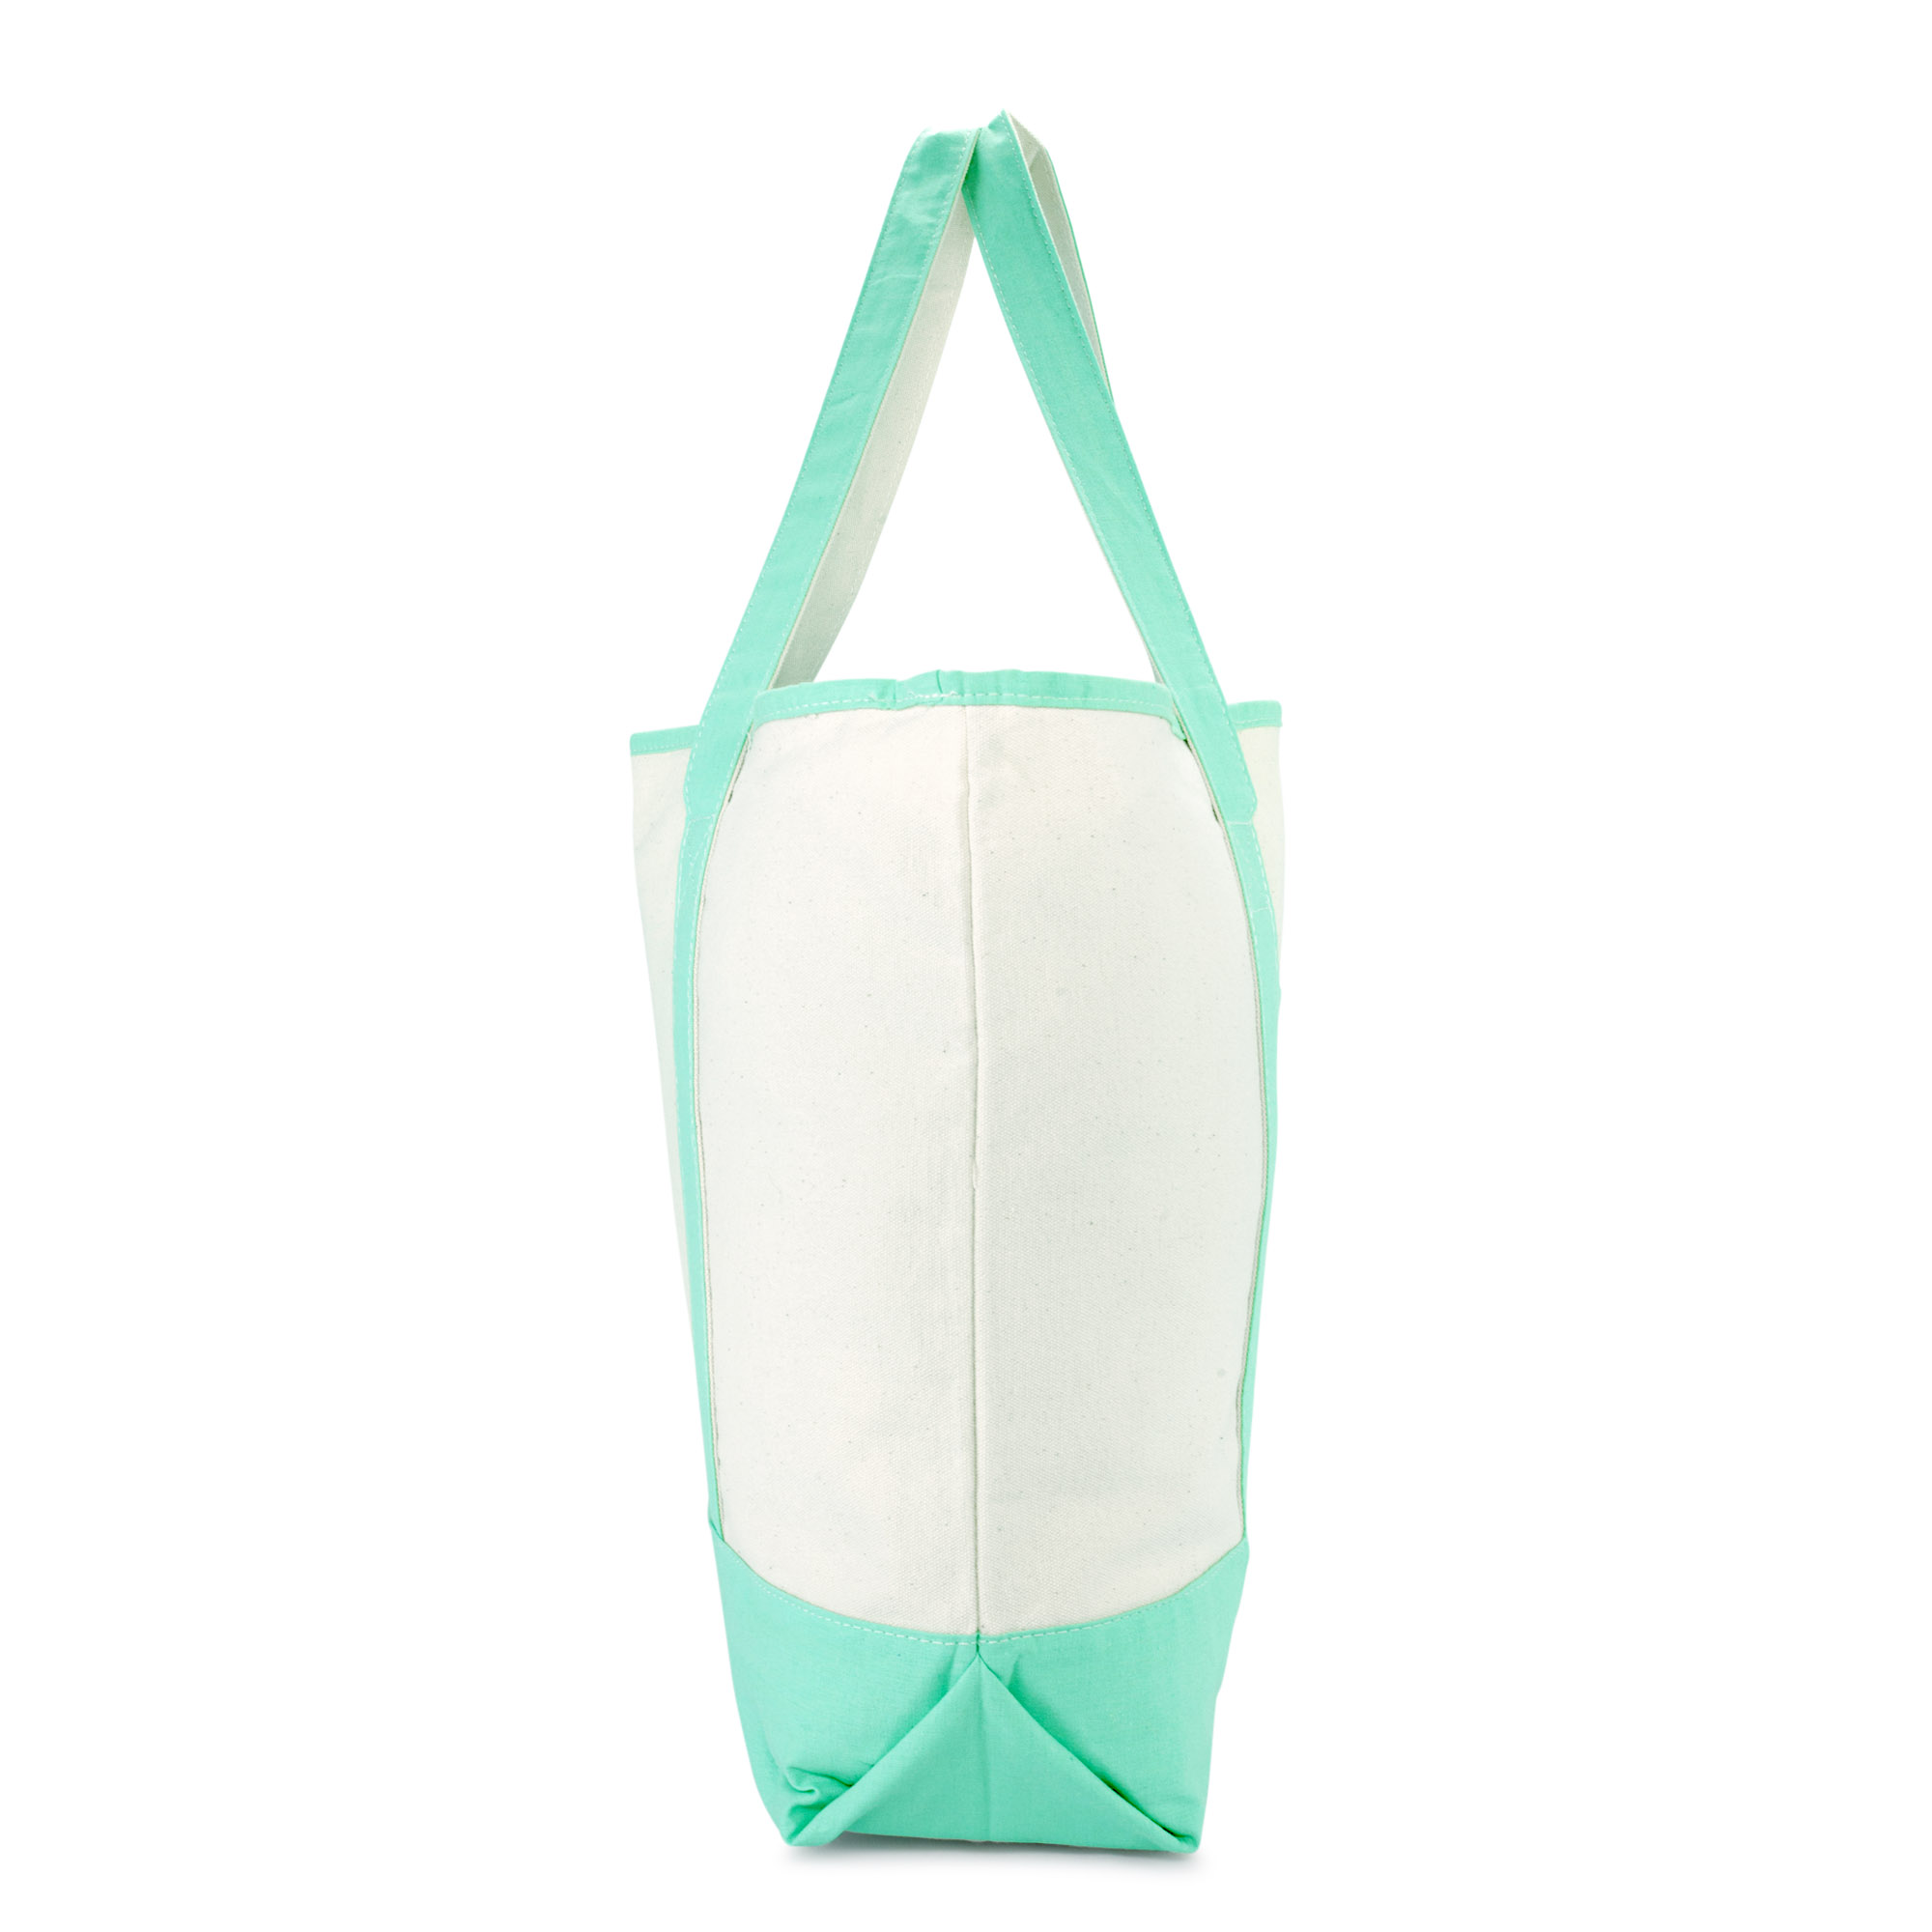 DALIX 22" Open Top Deluxe Tote Bag with Outer Pocket in Mint Green - image 2 of 5